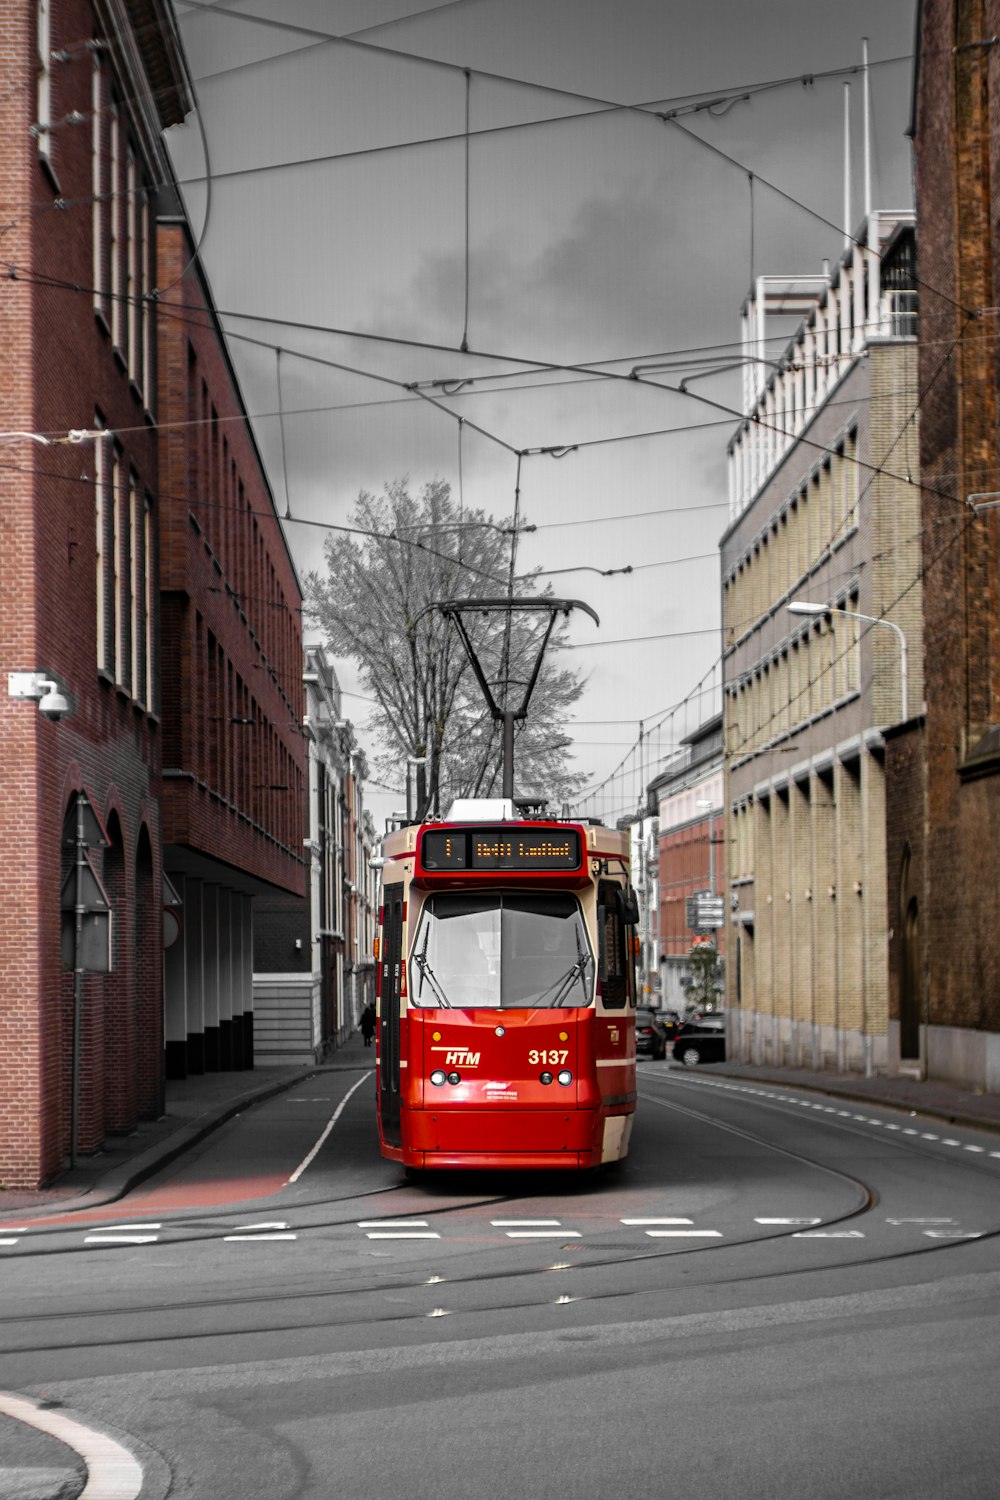 red tram on road during daytime